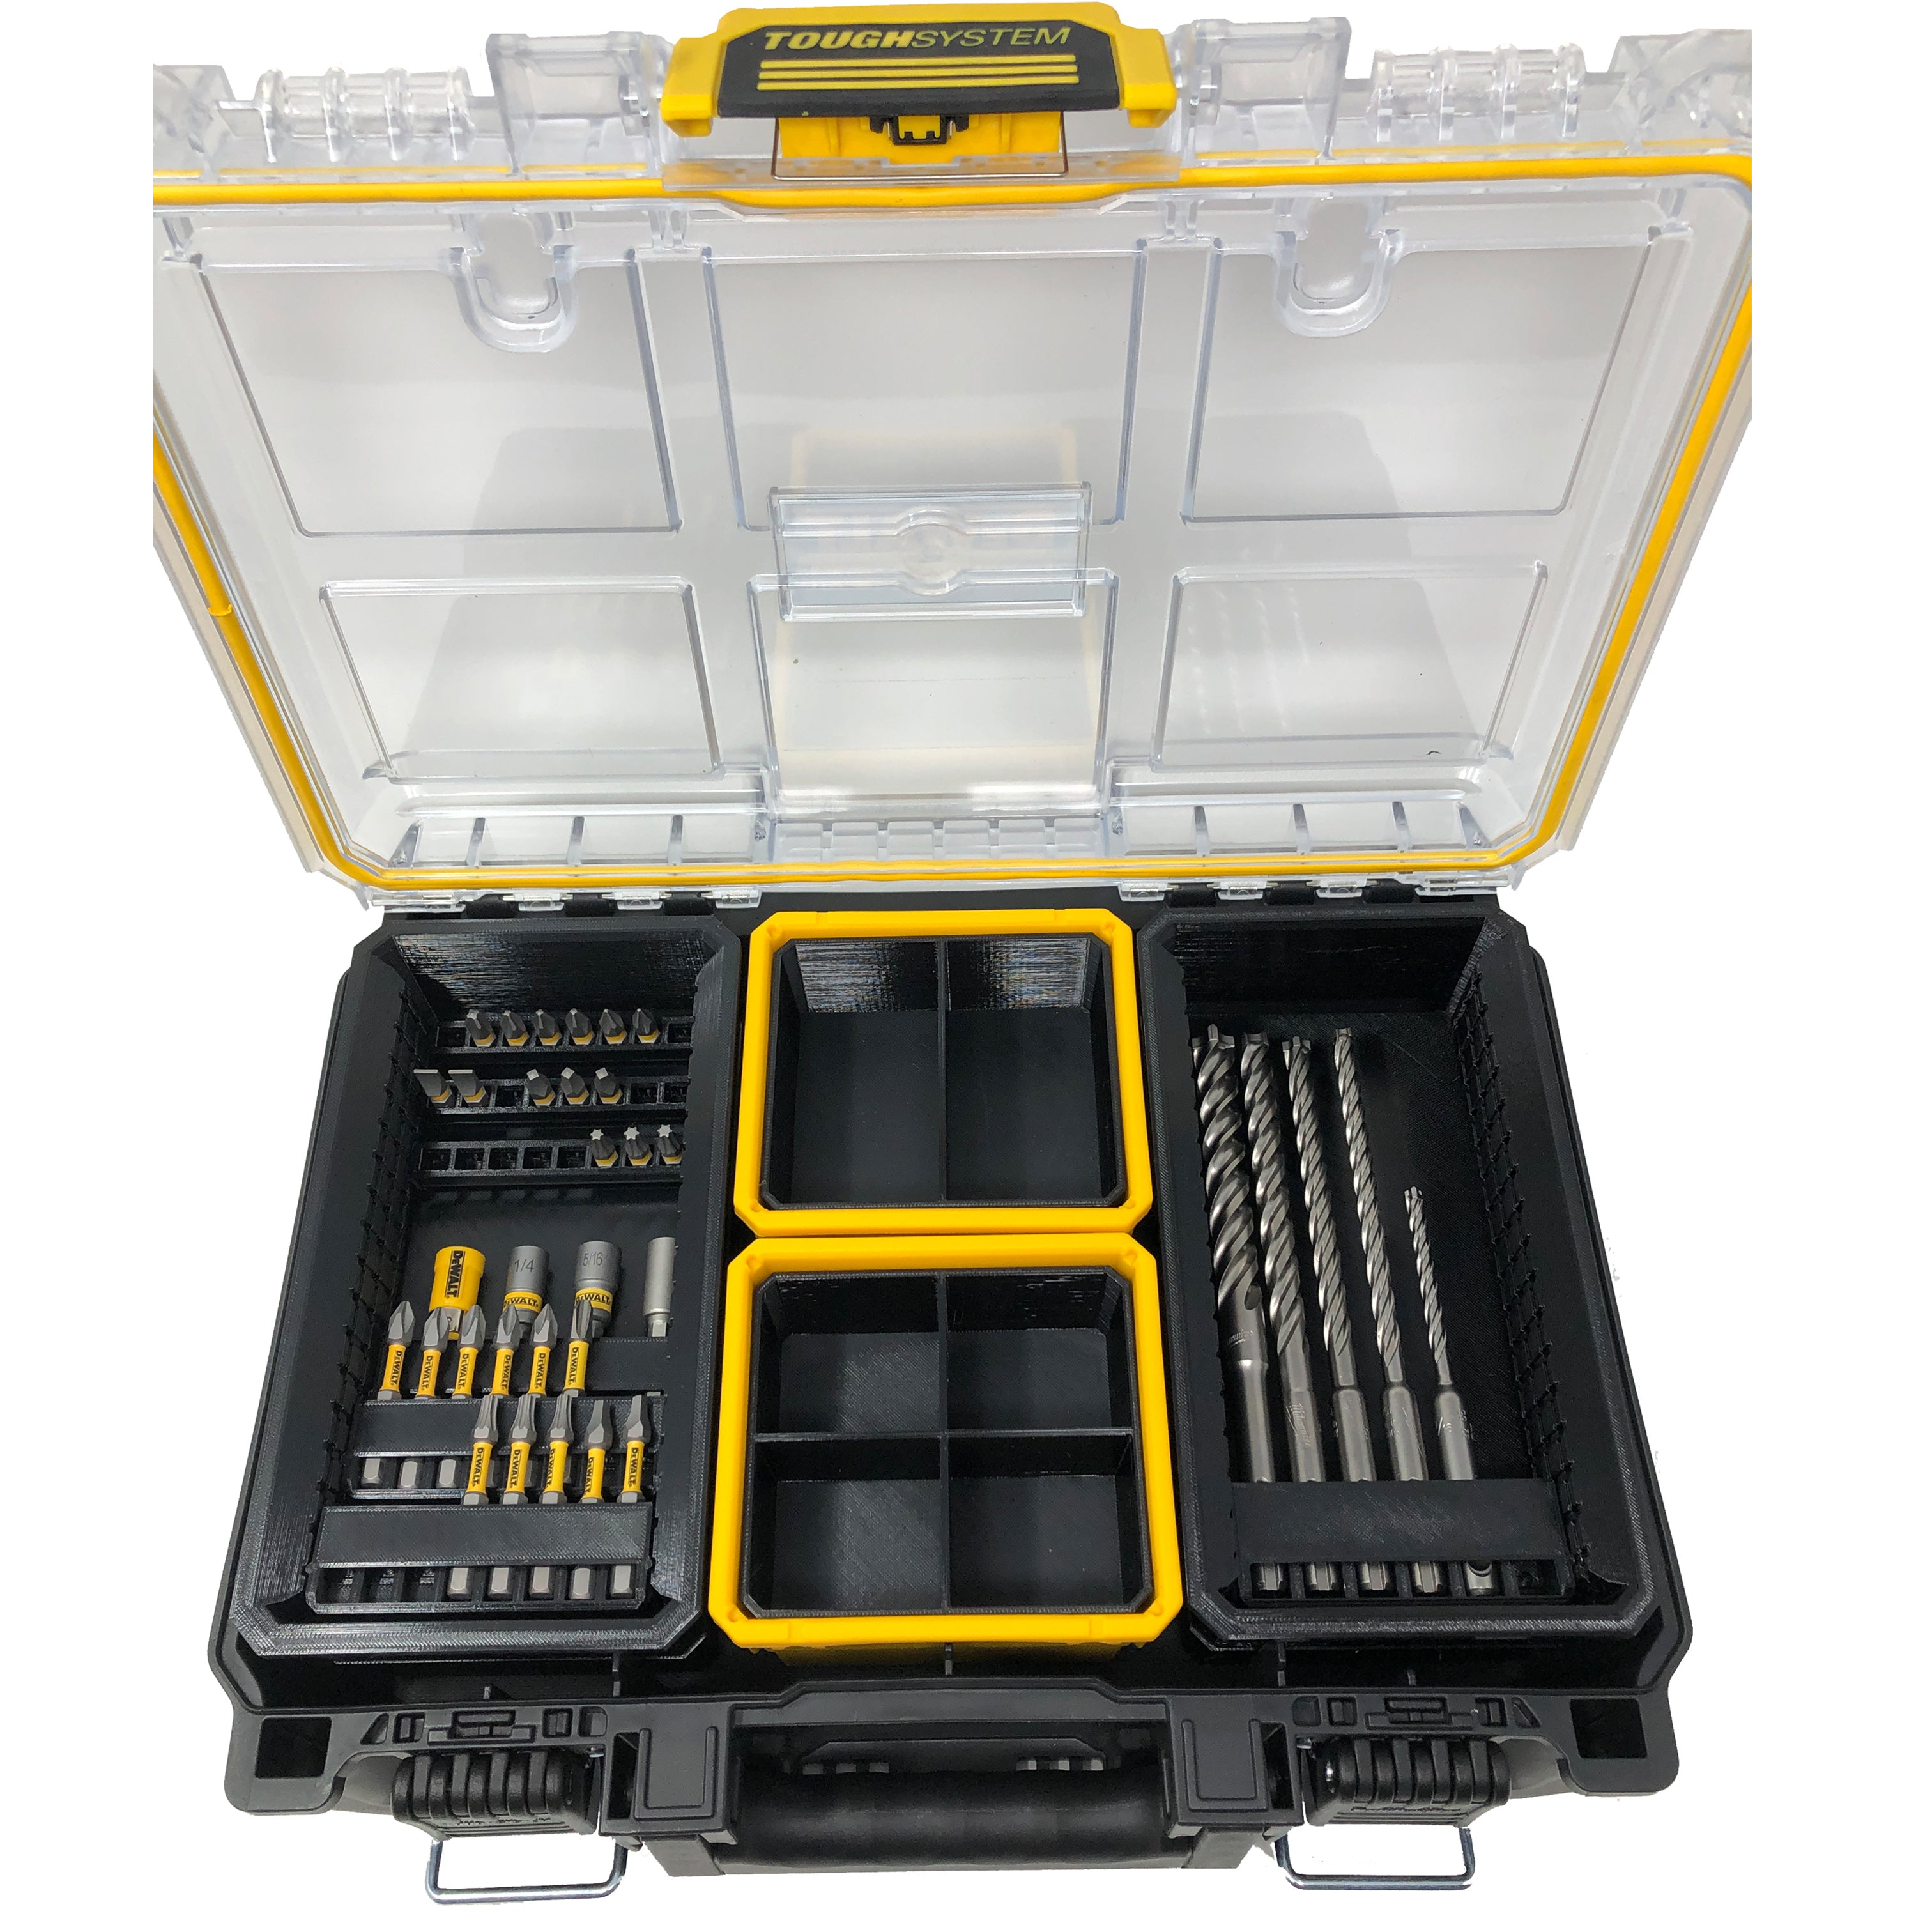 The BEST WAY to Organise the DeWalt Toughsystem 2.0! 